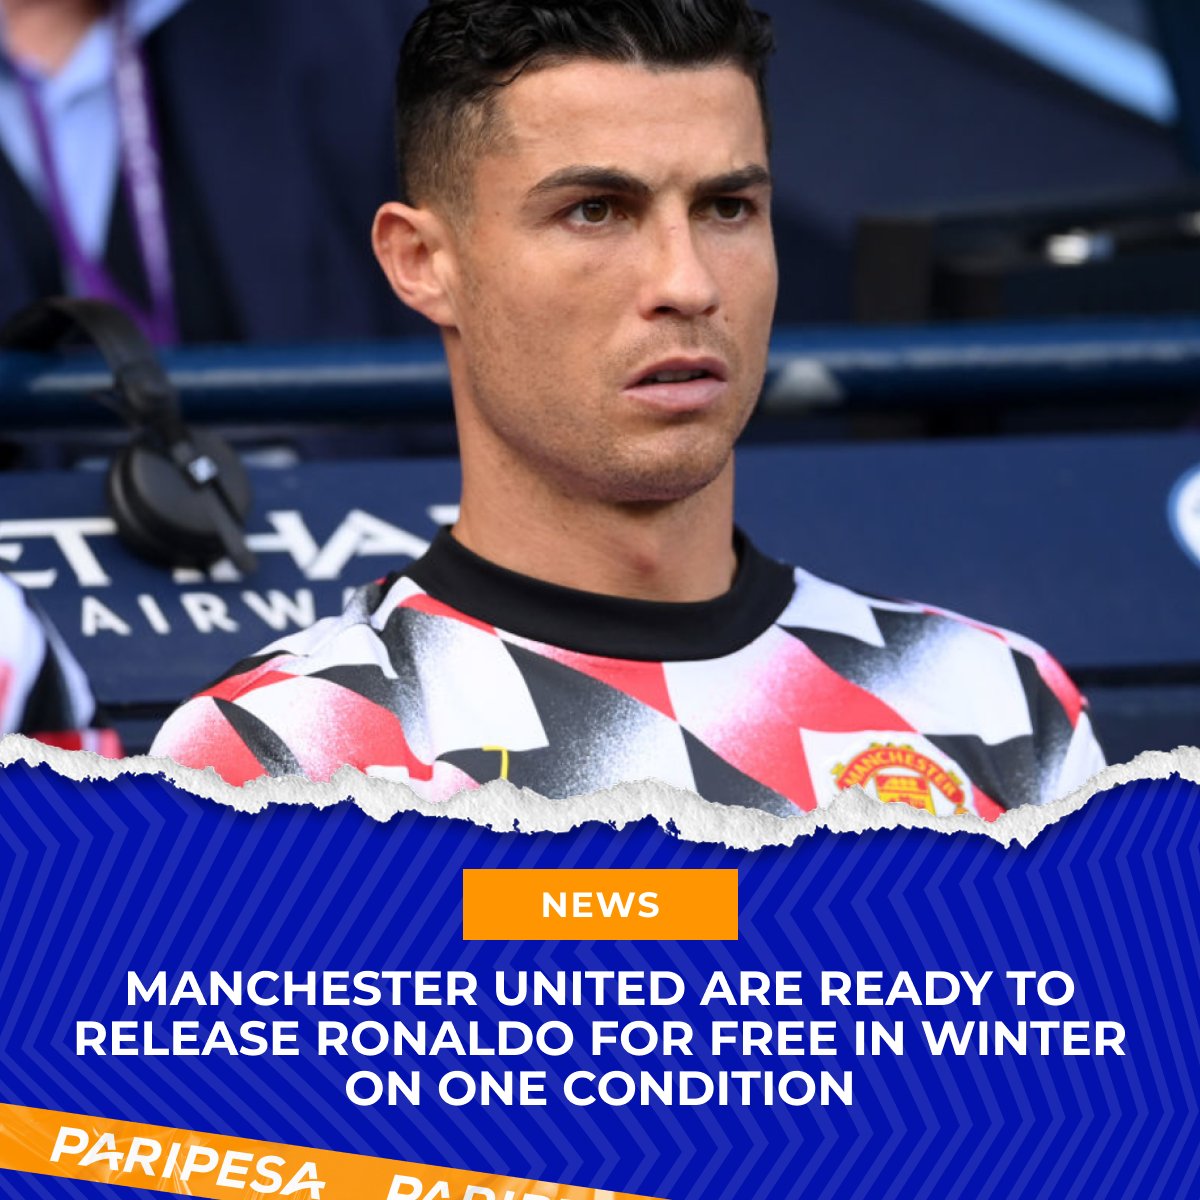 💬 According to The Athletic, MU are ready to release Ronaldo free of charge, subject to termination of the contract by mutual agreement of the parties. 😁 At the same time, MU doesn’t plan to terminate the striker's contract with the payment of a penalty. #Ronaldo